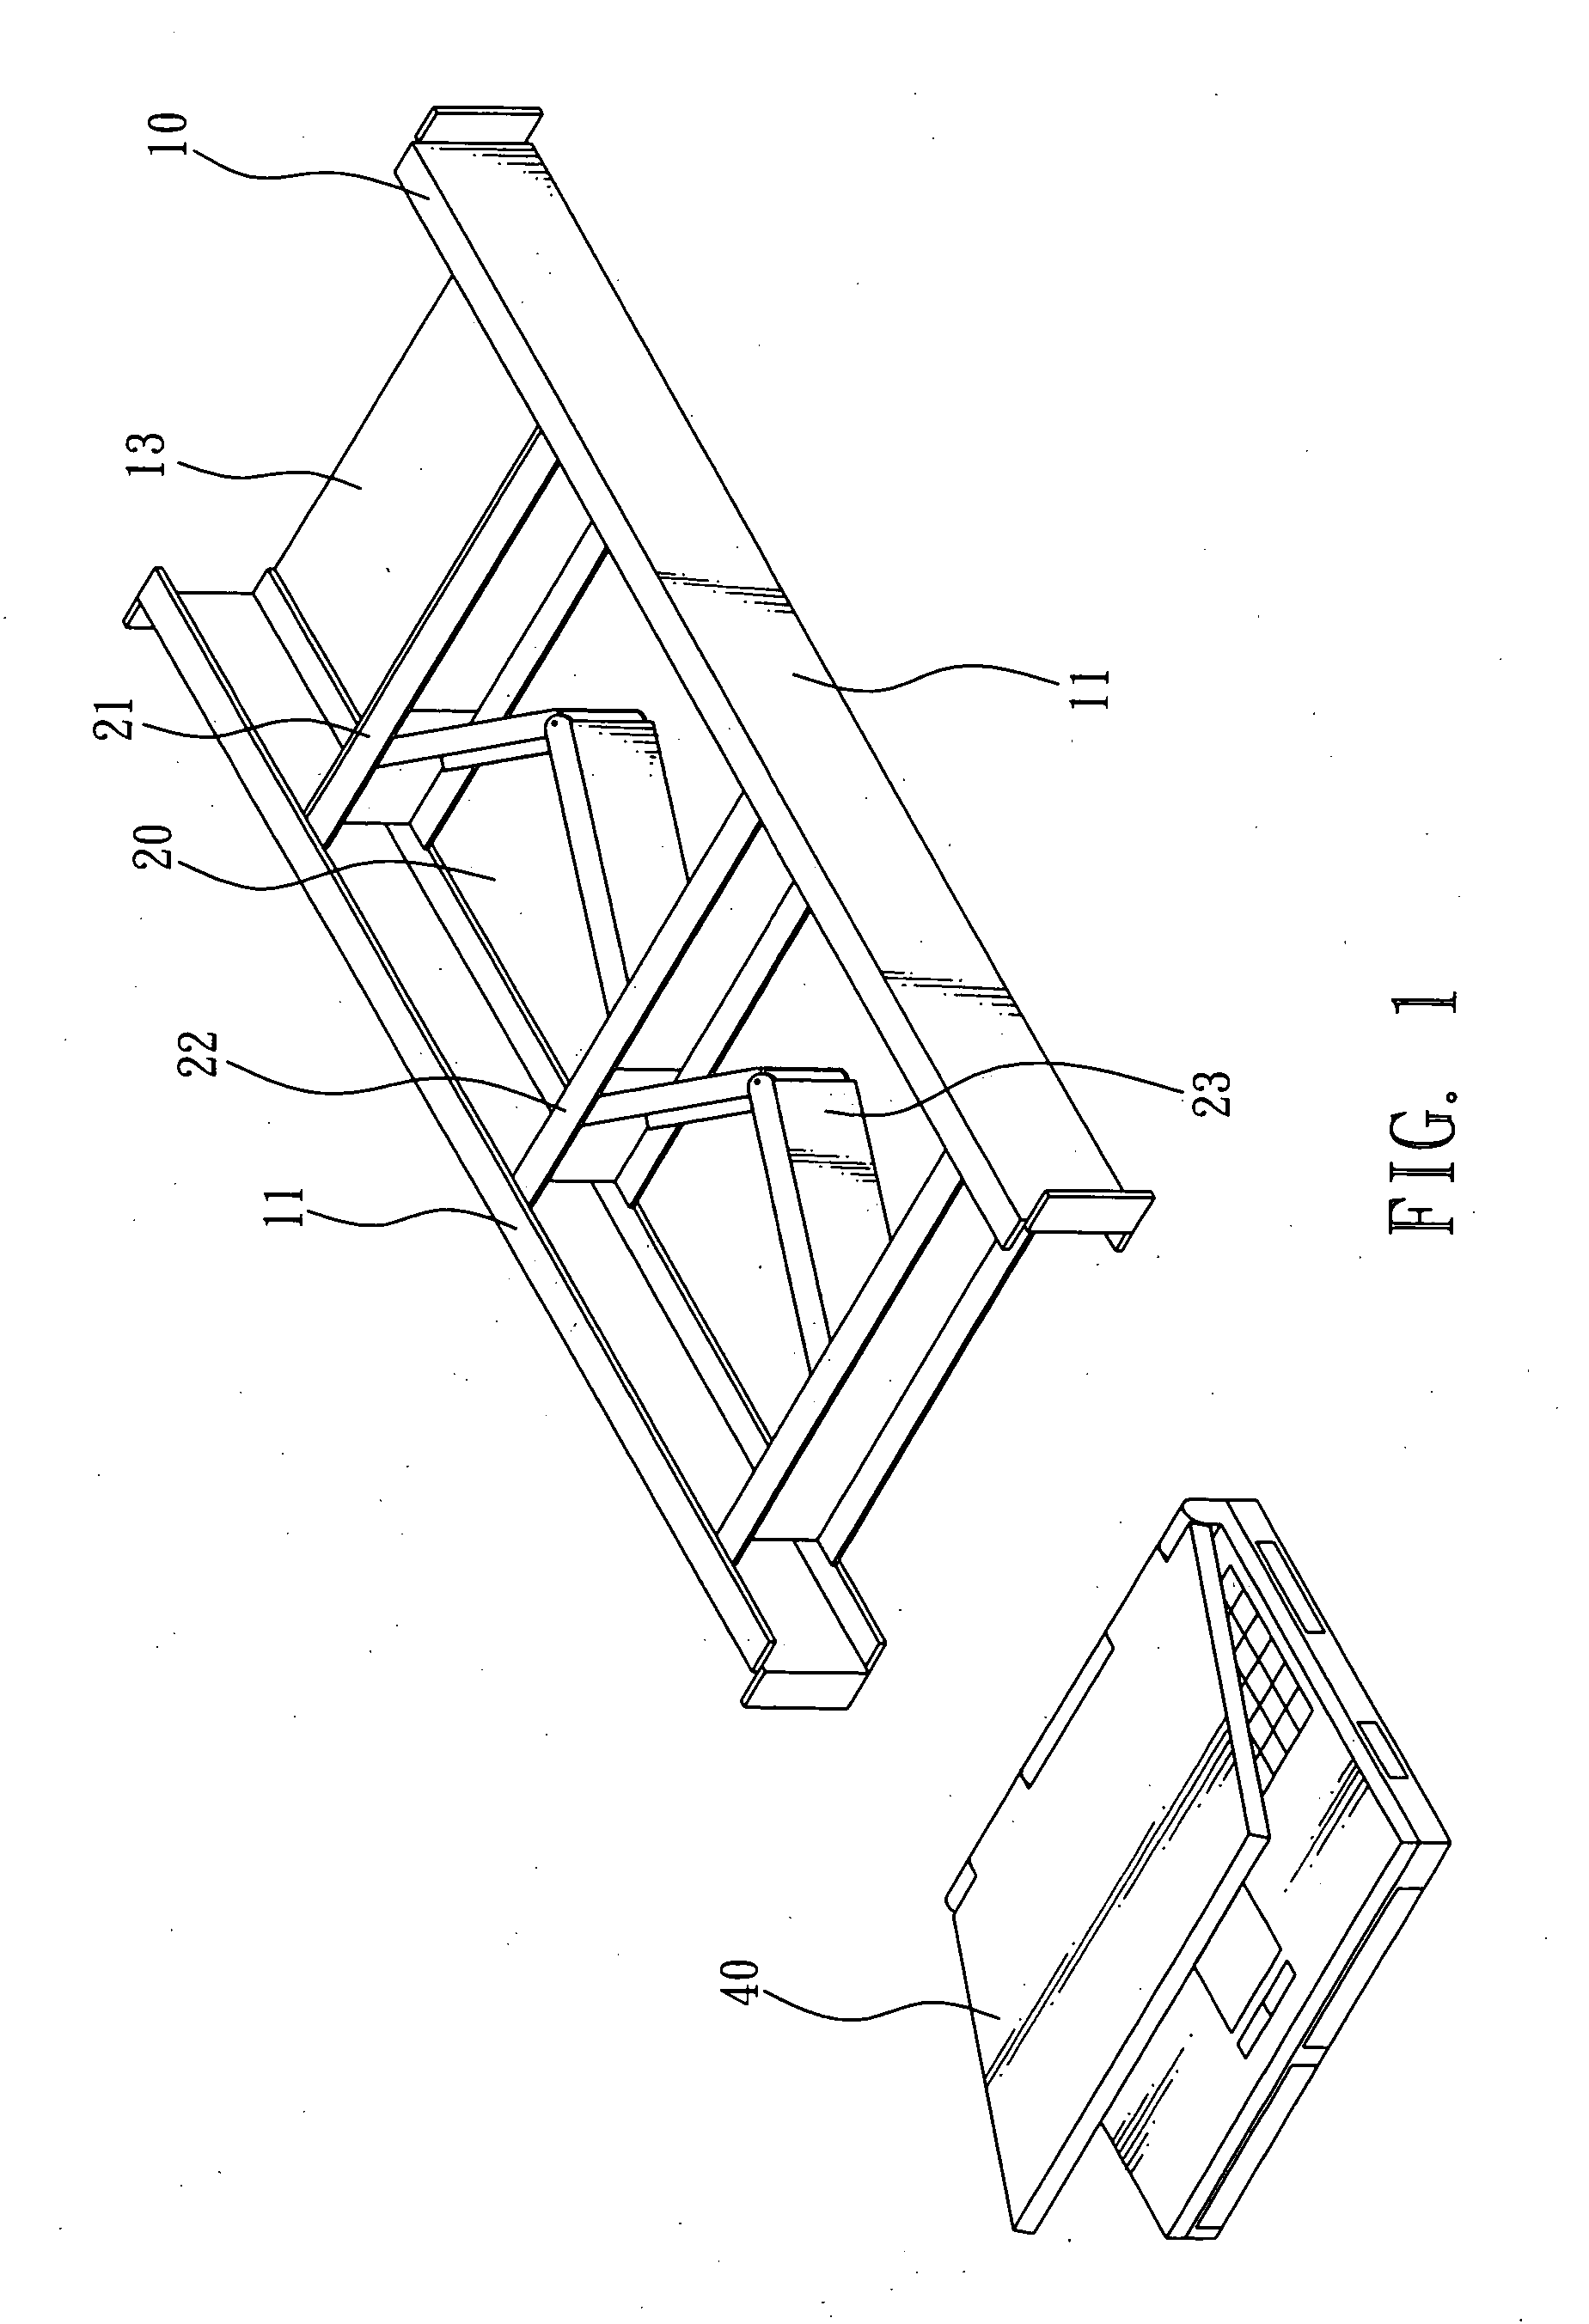 Bidirectional convertible KVM switch assembly structure and its KVM switch